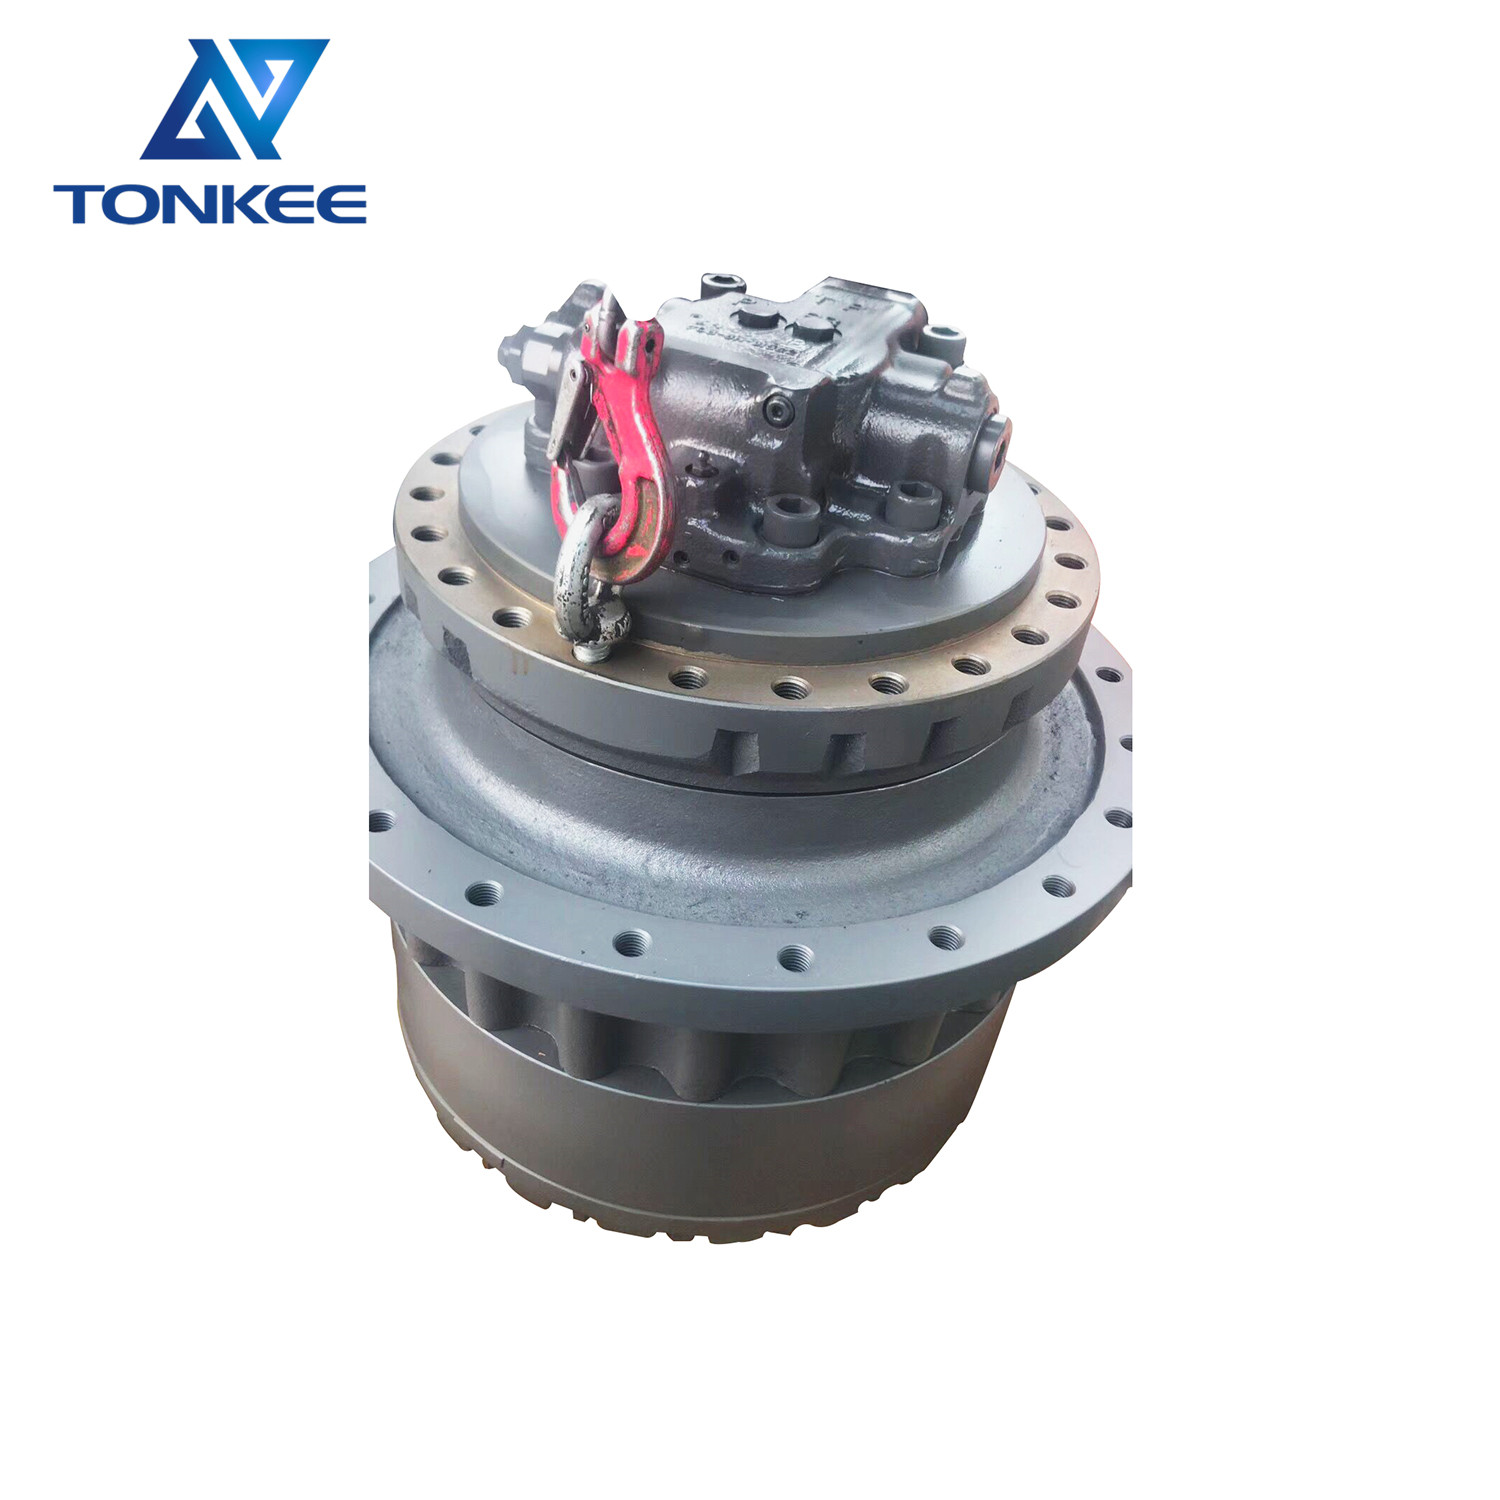 NEW 207-27-00371 207-27-00370 207-27-00260 final drive assembly PC300-7 PC350-7 PC360-7 excavator travel motor assy